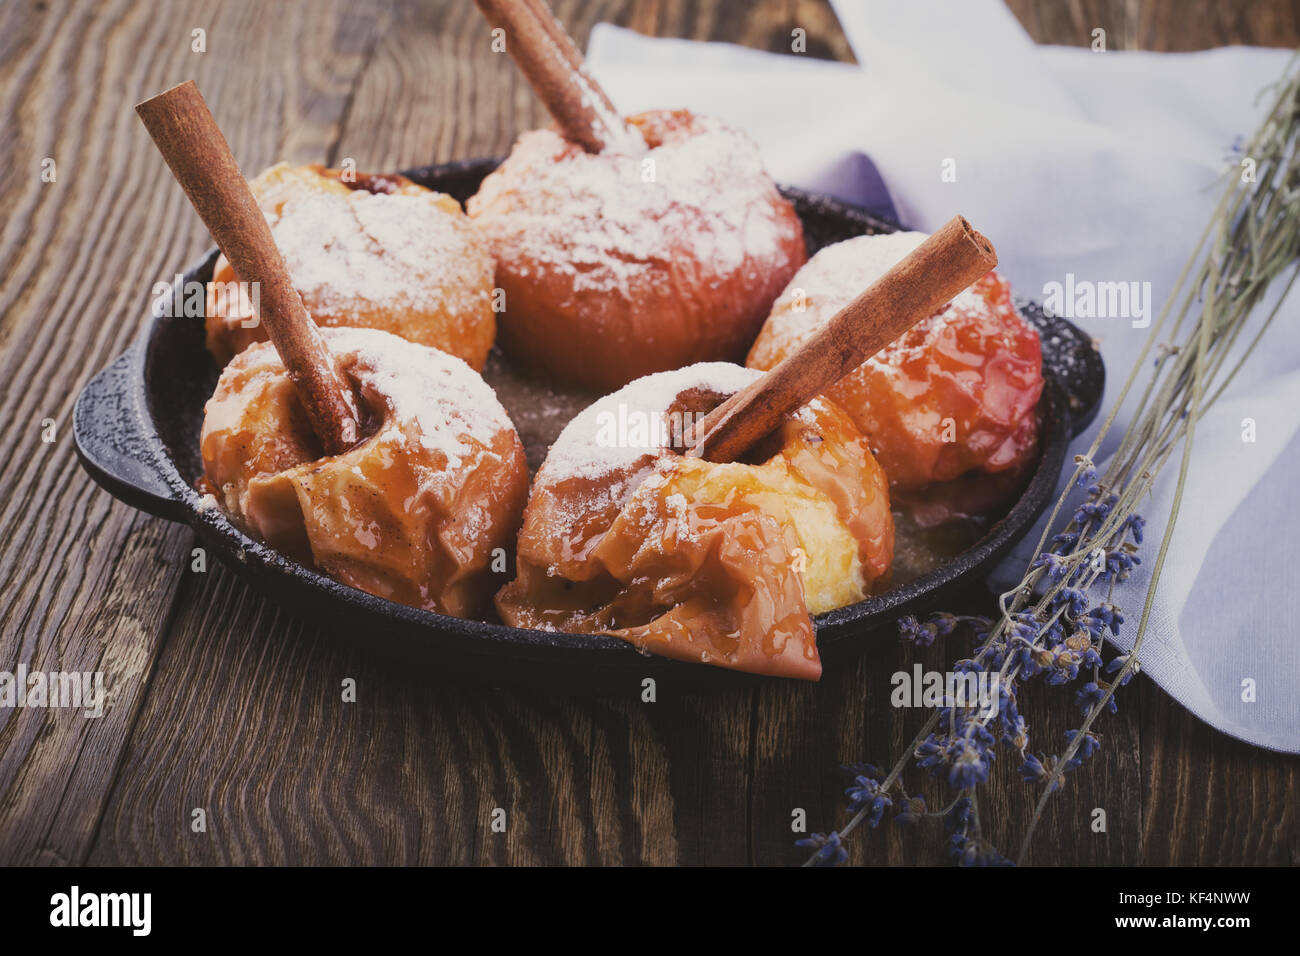 Caramelized baked apples with cinnamon sticks in cast iron skillet on rustic wooden background Stock Photo